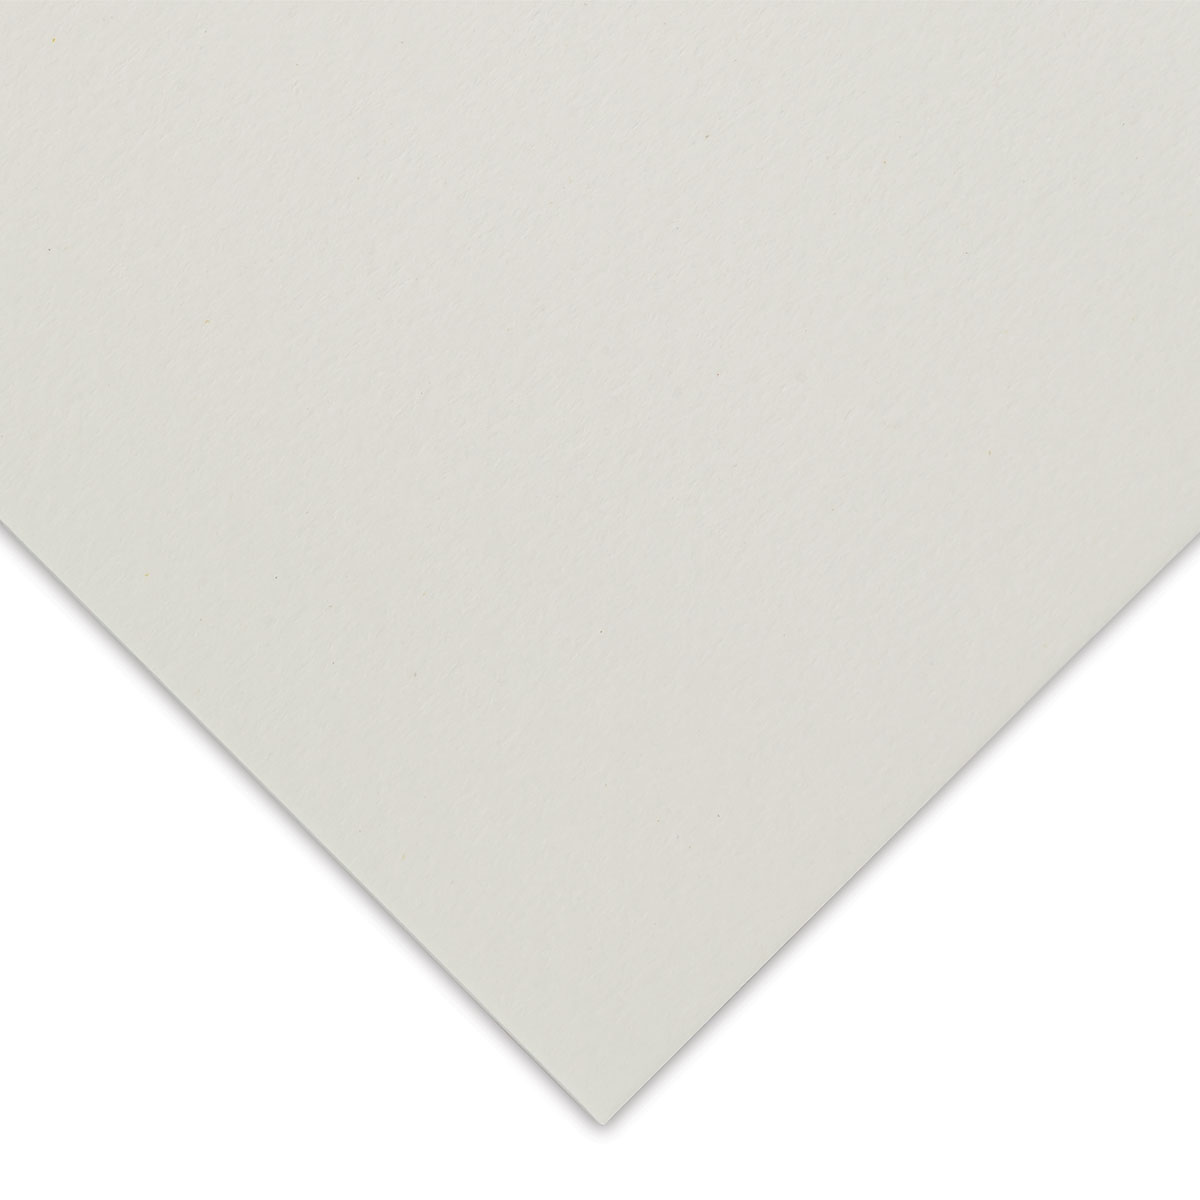 Blick Studio Watercolor Pad - 9 inch x 12 inch, 140 lb, Tapebound, 15 Sheets, Size: 9 inch x 12 inch, 140lb, 15 Sheets